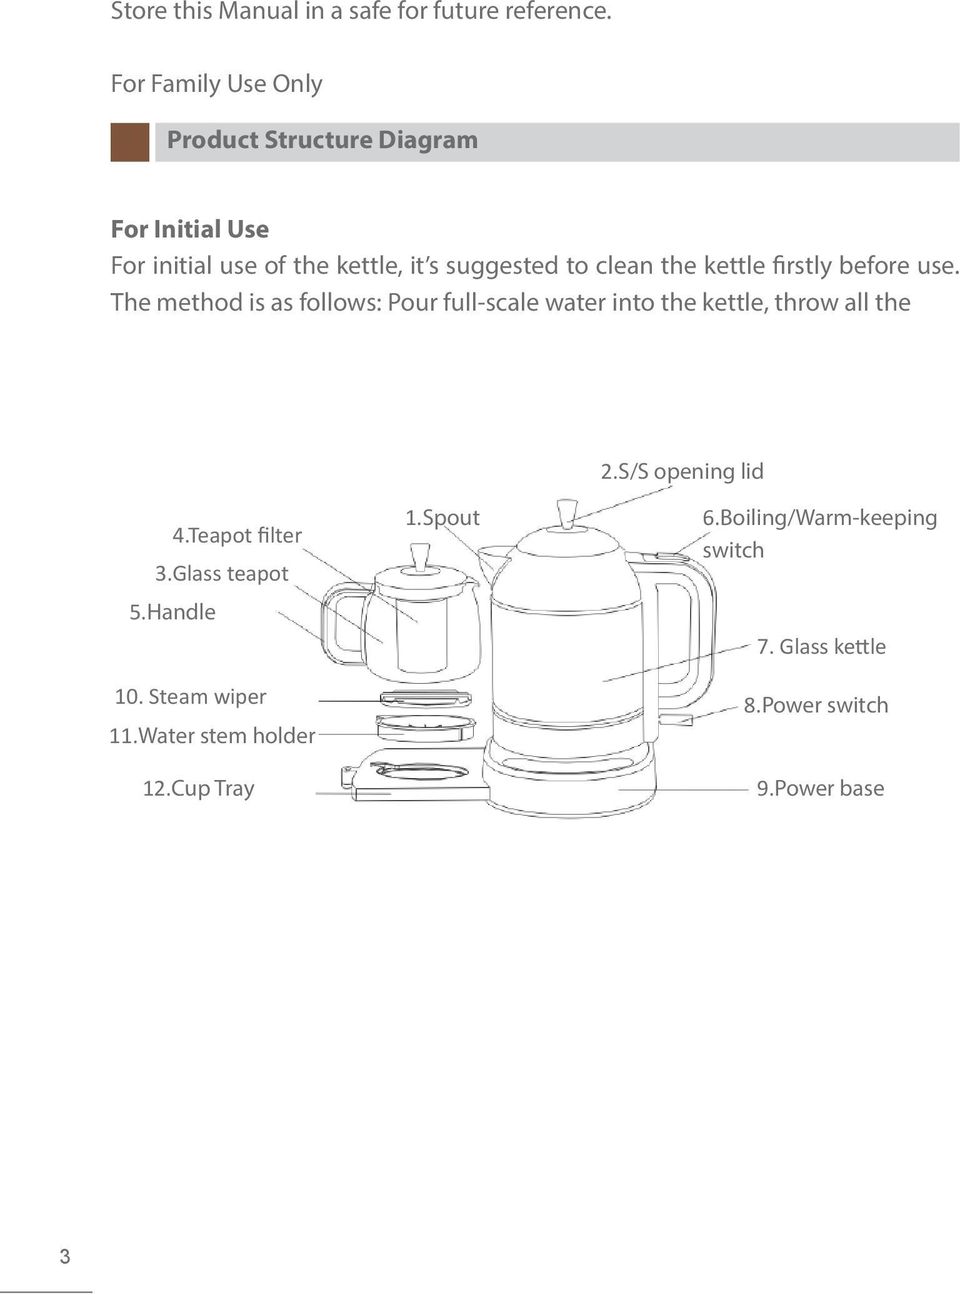 the kettle firstly before use. The method is as follows: Pour full-scale water into the kettle, throw all the 2.